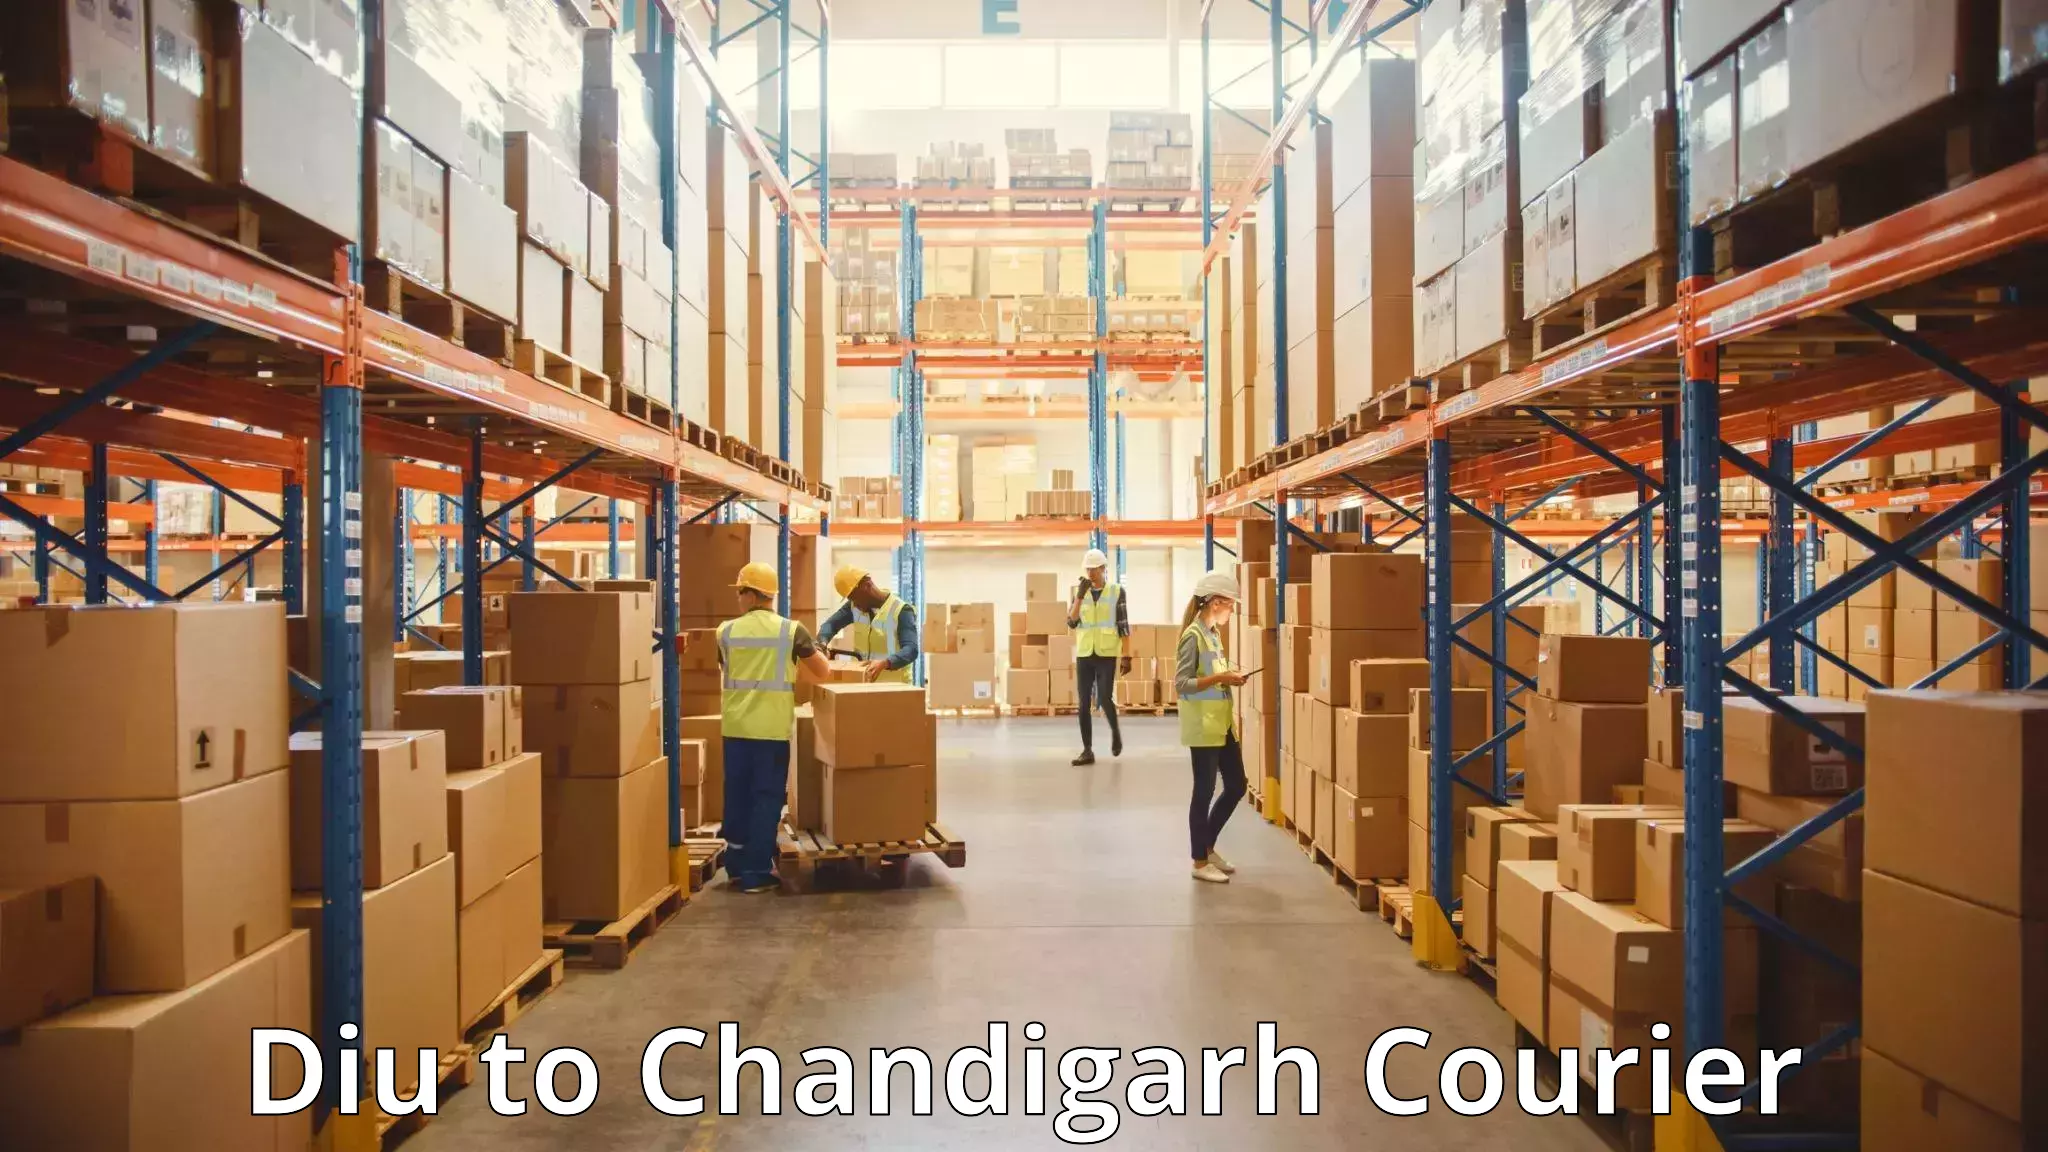 Online luggage shipping booking Diu to Chandigarh